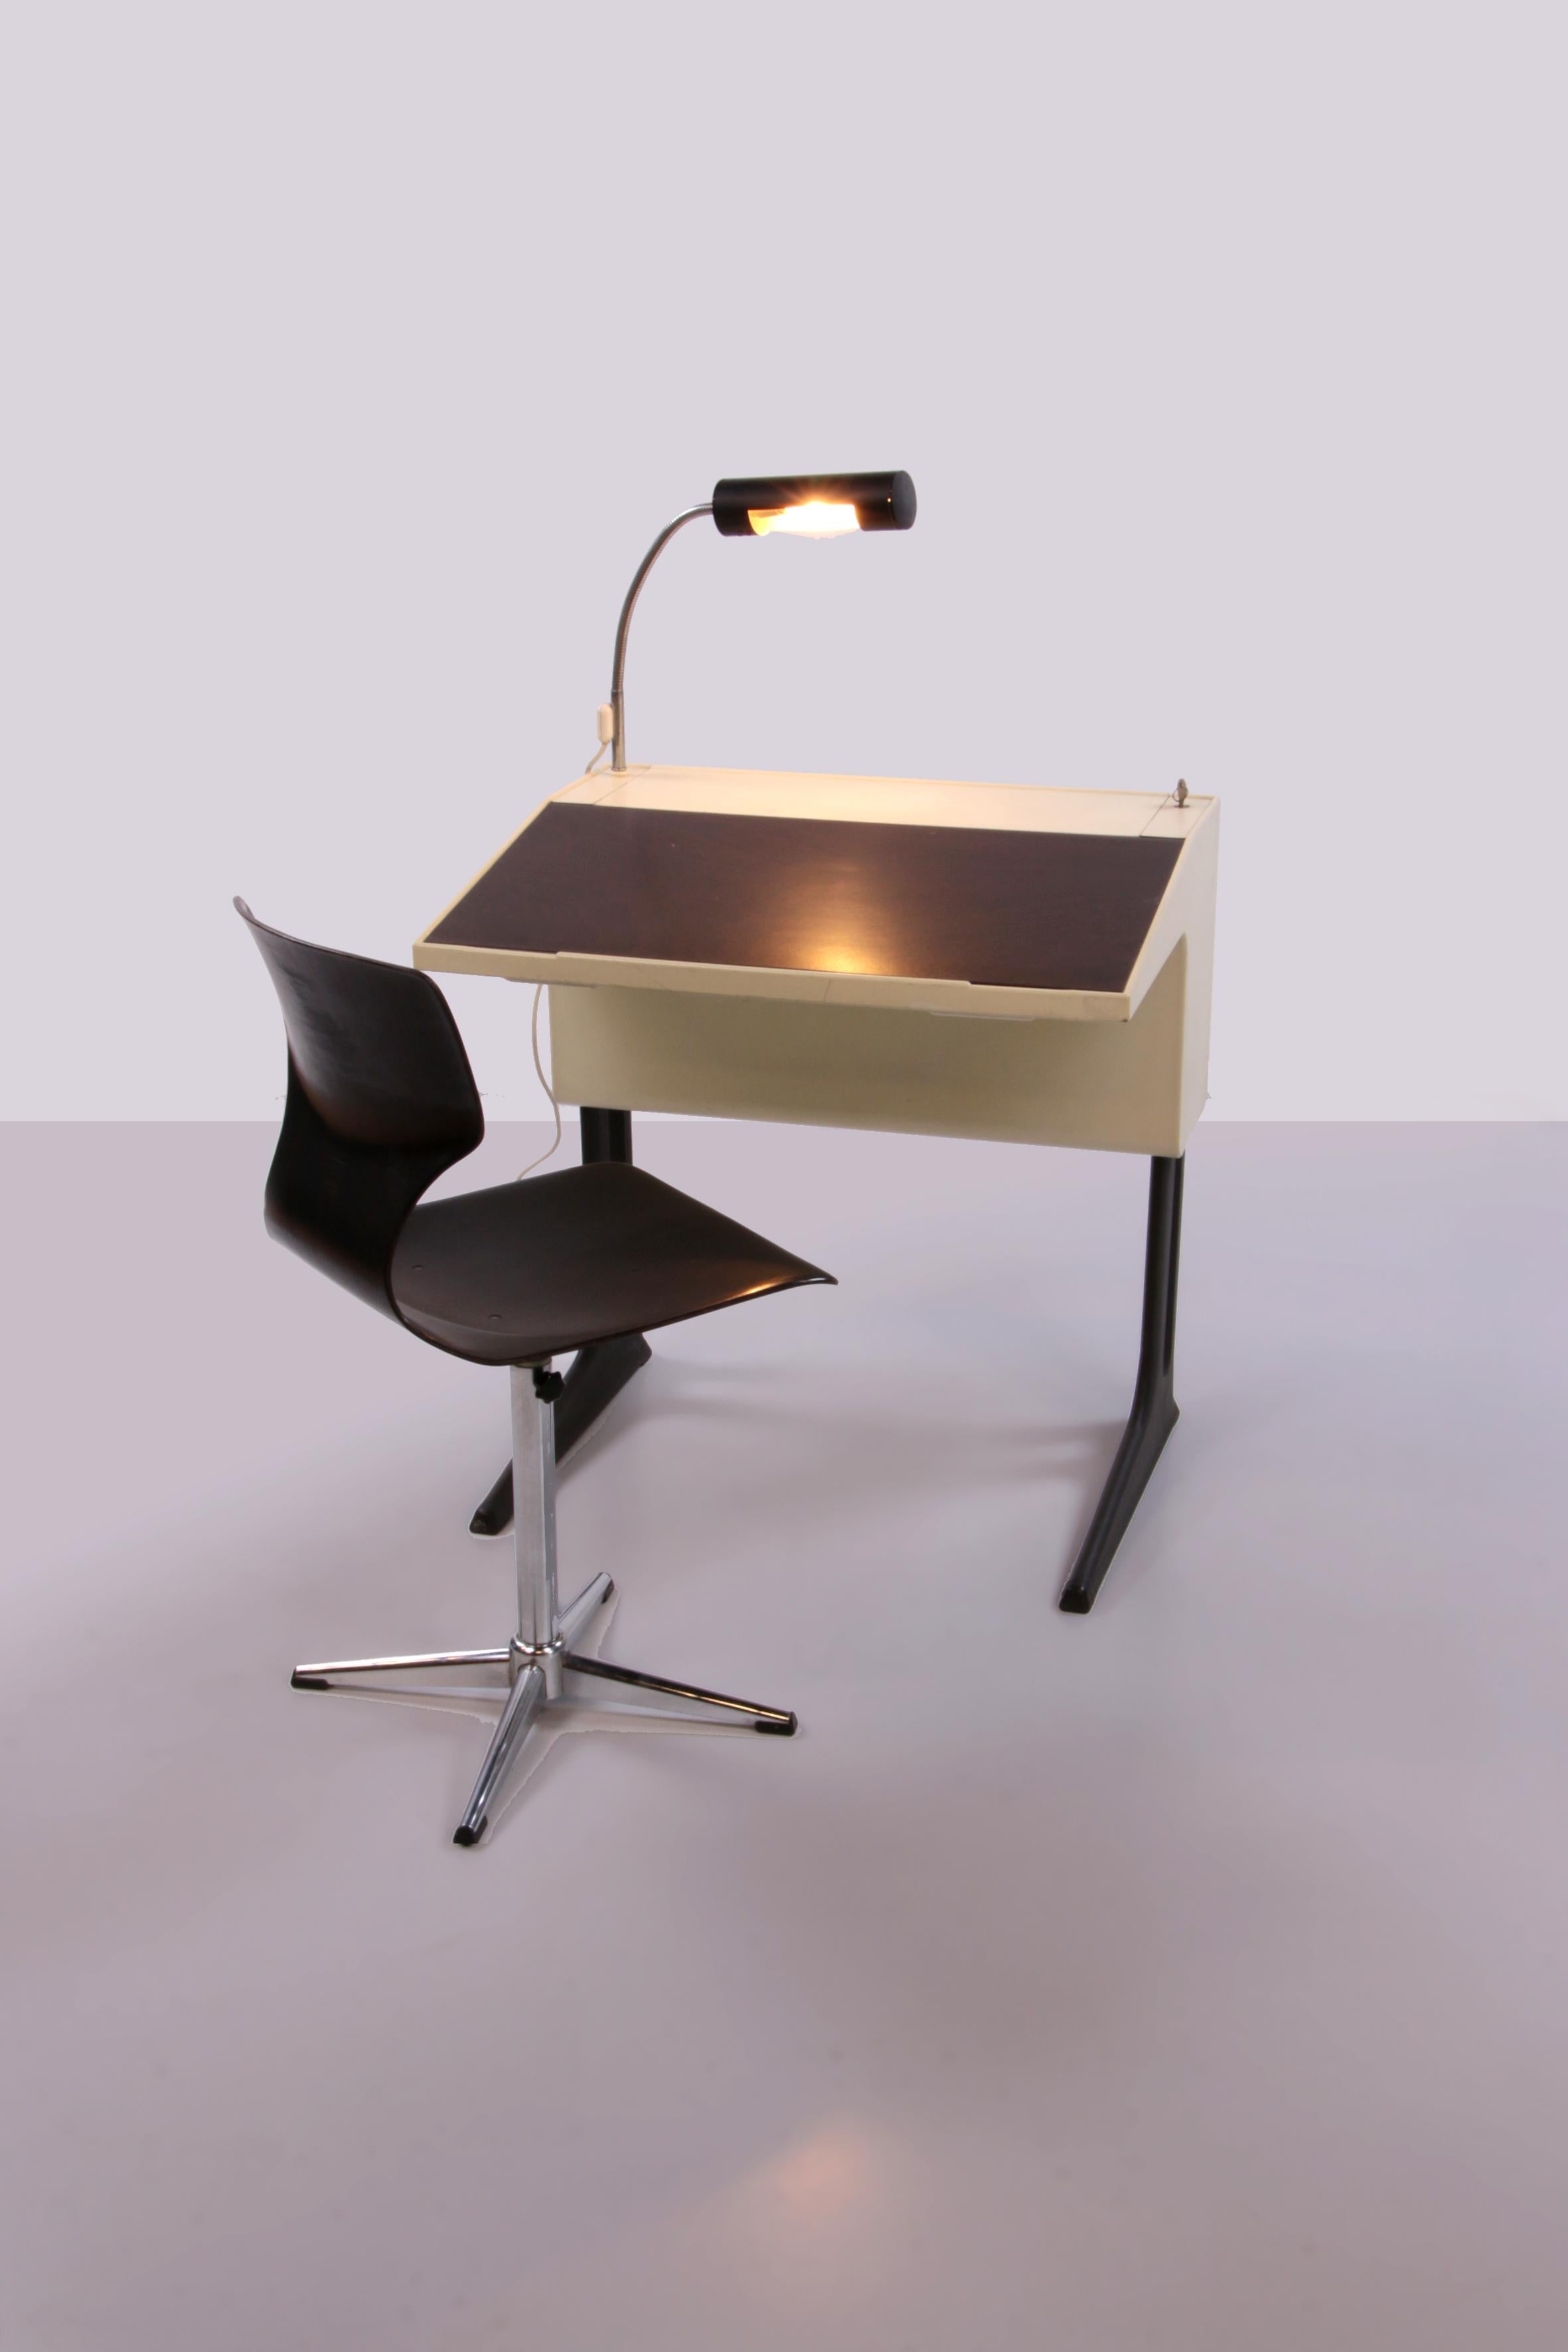 Flötotto adjustable desk design by Luigi Colani, 1970 Germany.


Space age desk from the 1970s by Luigi Colani for Flötotto.

Body and height-adjustable plastic frame with a hinged wood effect writing surface. There are several useful features